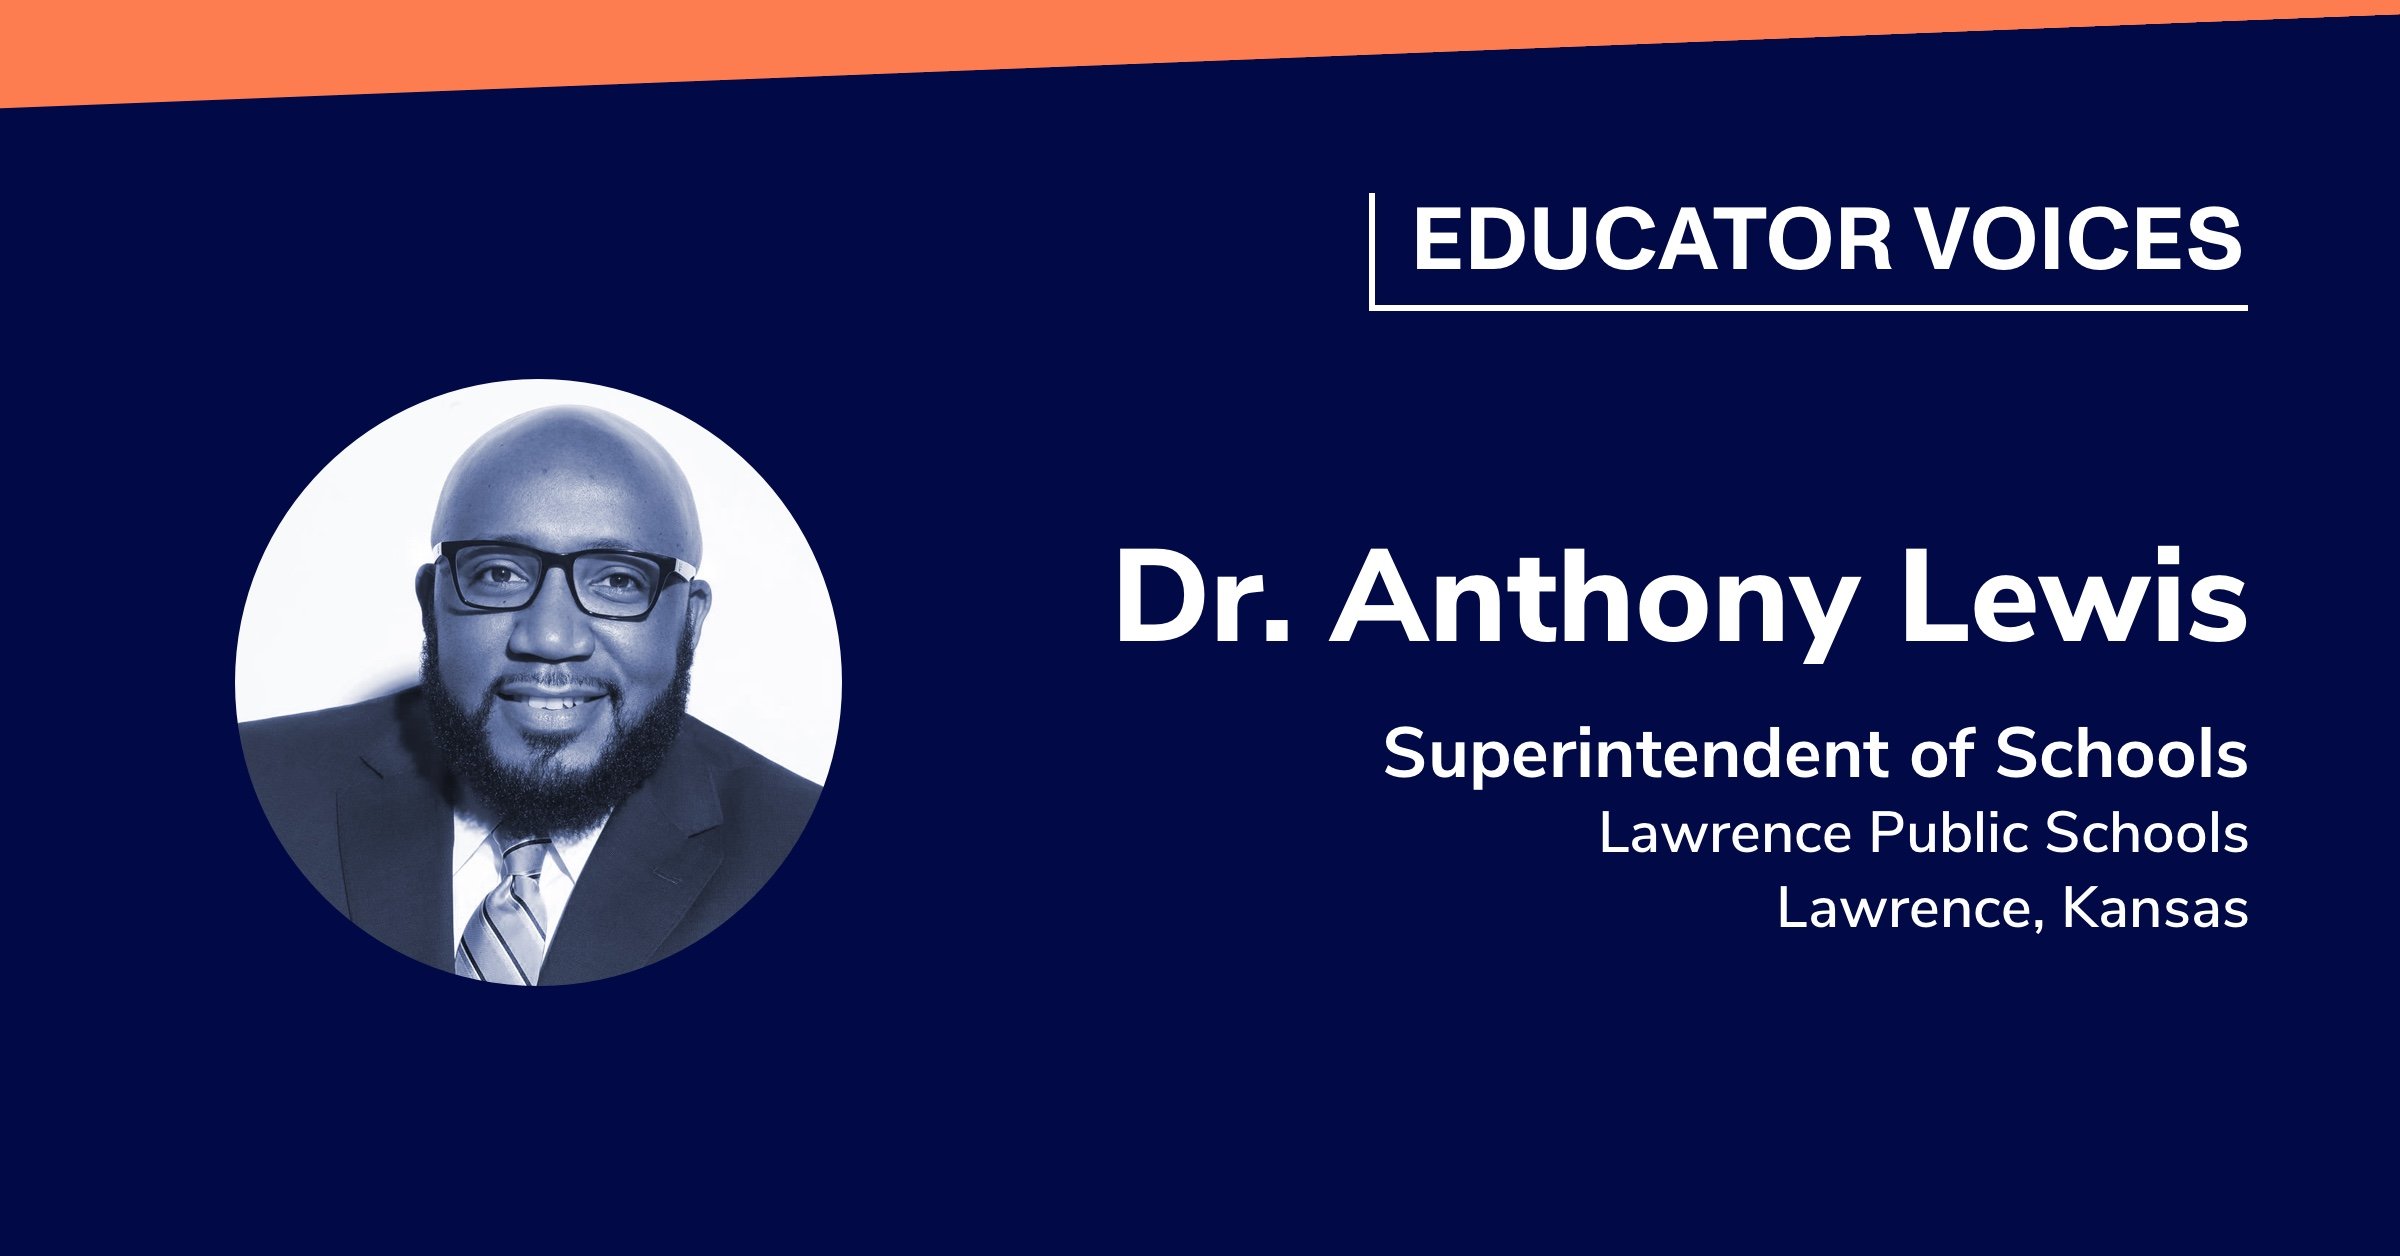 Dr. Anthony Lewis: Superintendent of Schools, Lawrence Public Schools, Lawrence, Kansas